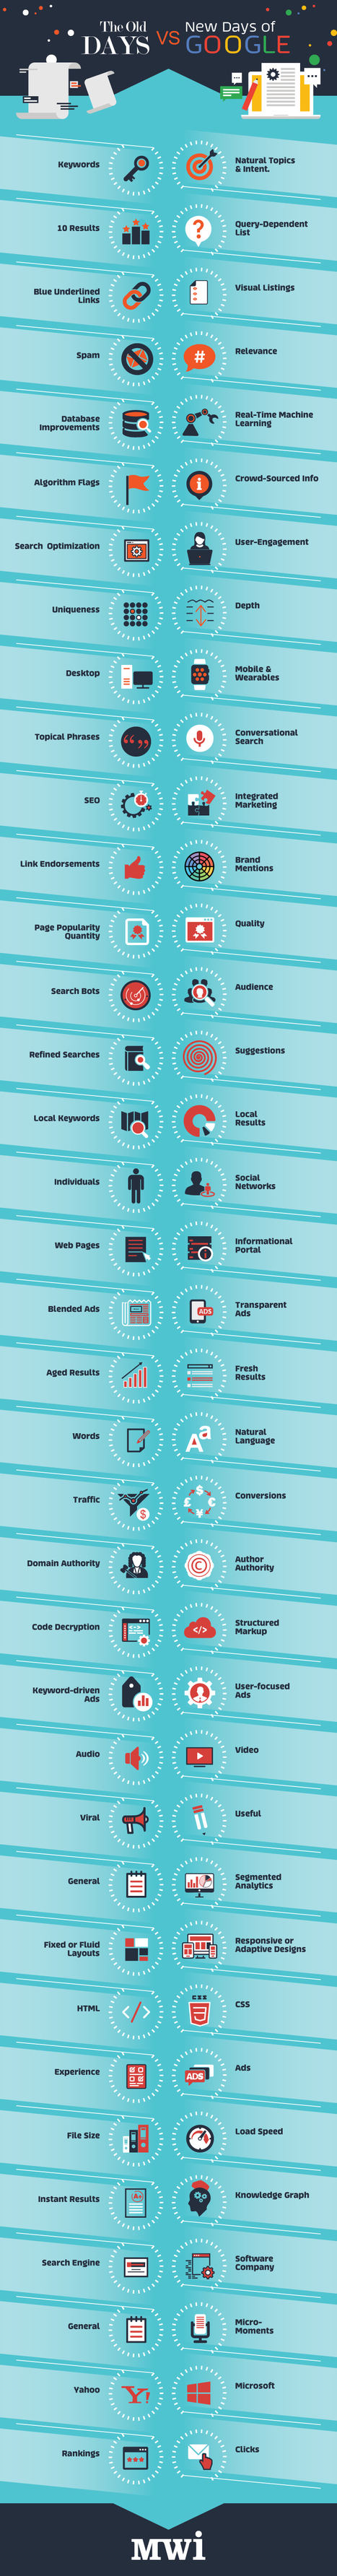 The Old Days VS New Days of Google [Infographic] | digital marketing strategy | Scoop.it